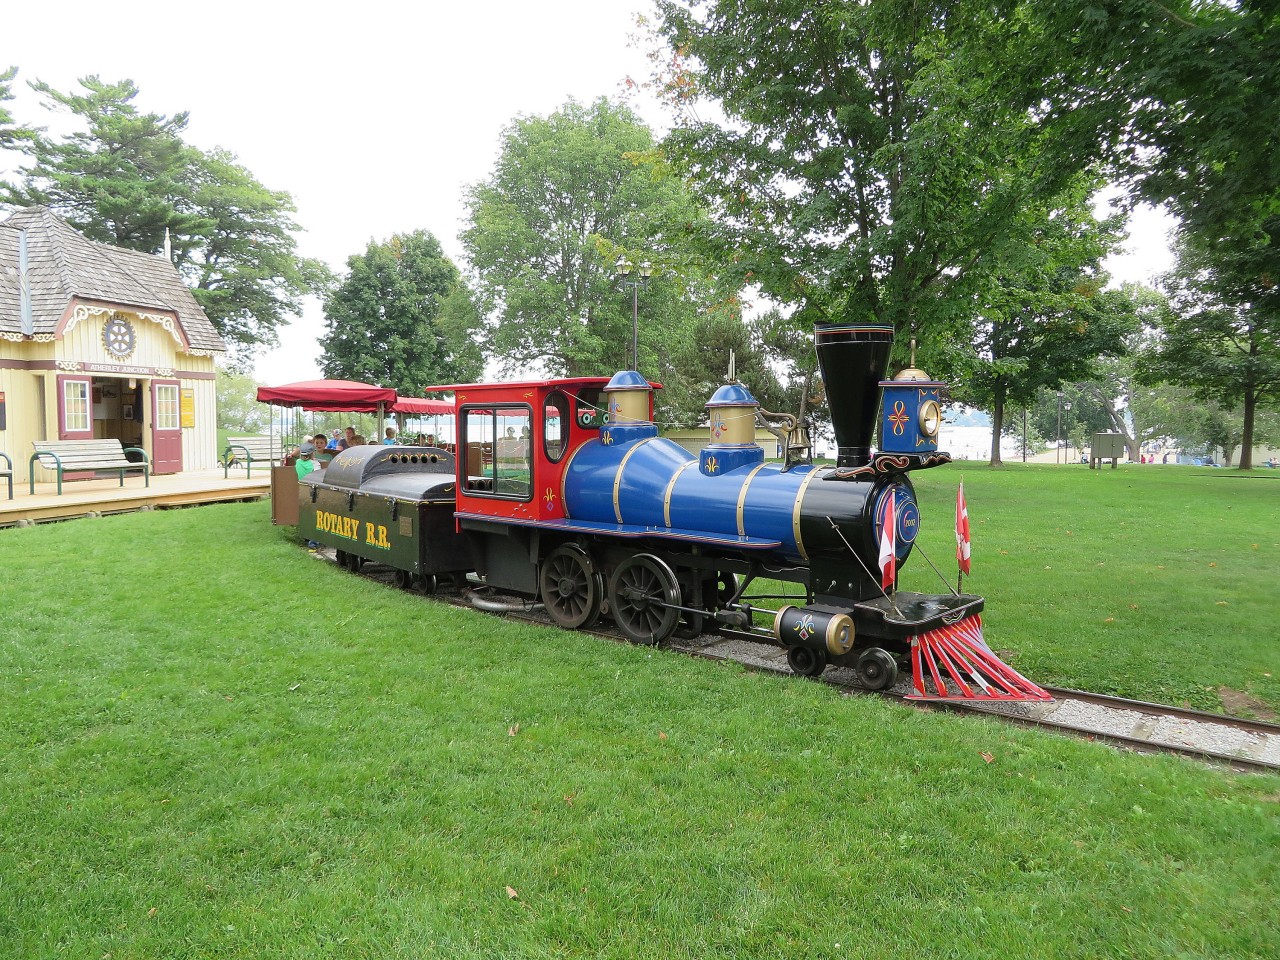 Orillia's Rotary Railroad in Couchiching Park tends to fly under the radar. It runs on summer weekends in the afternoons.